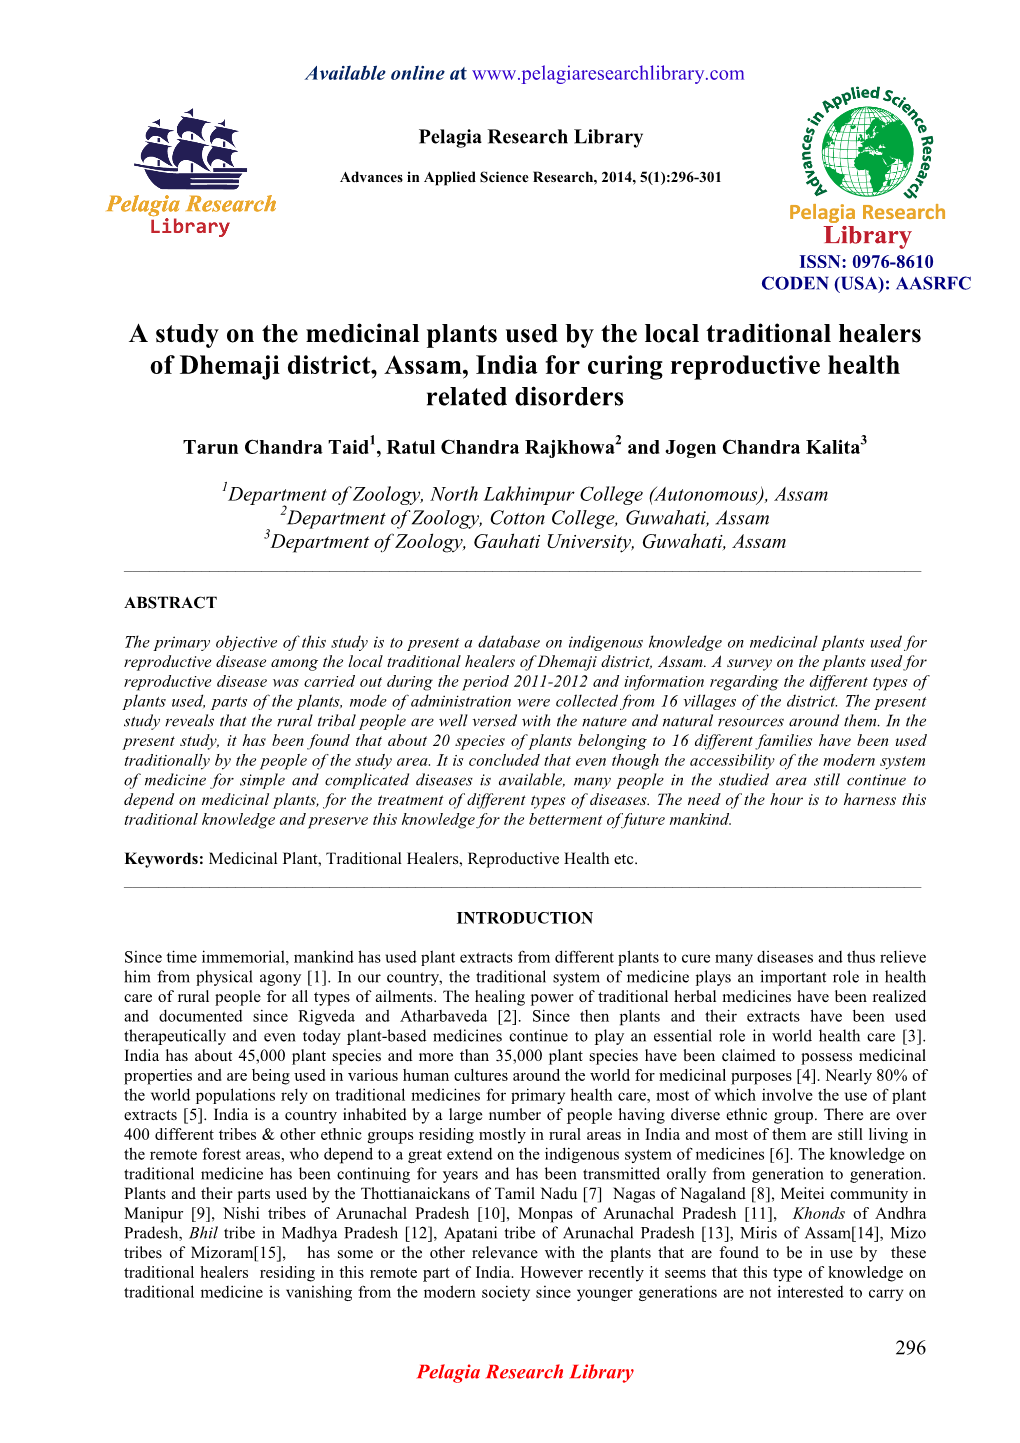 A Study on the Medicinal Plants Used by the Local Traditional Healers of Dhemaji District, Assam, India for Curing Reproductive Health Related Disorders